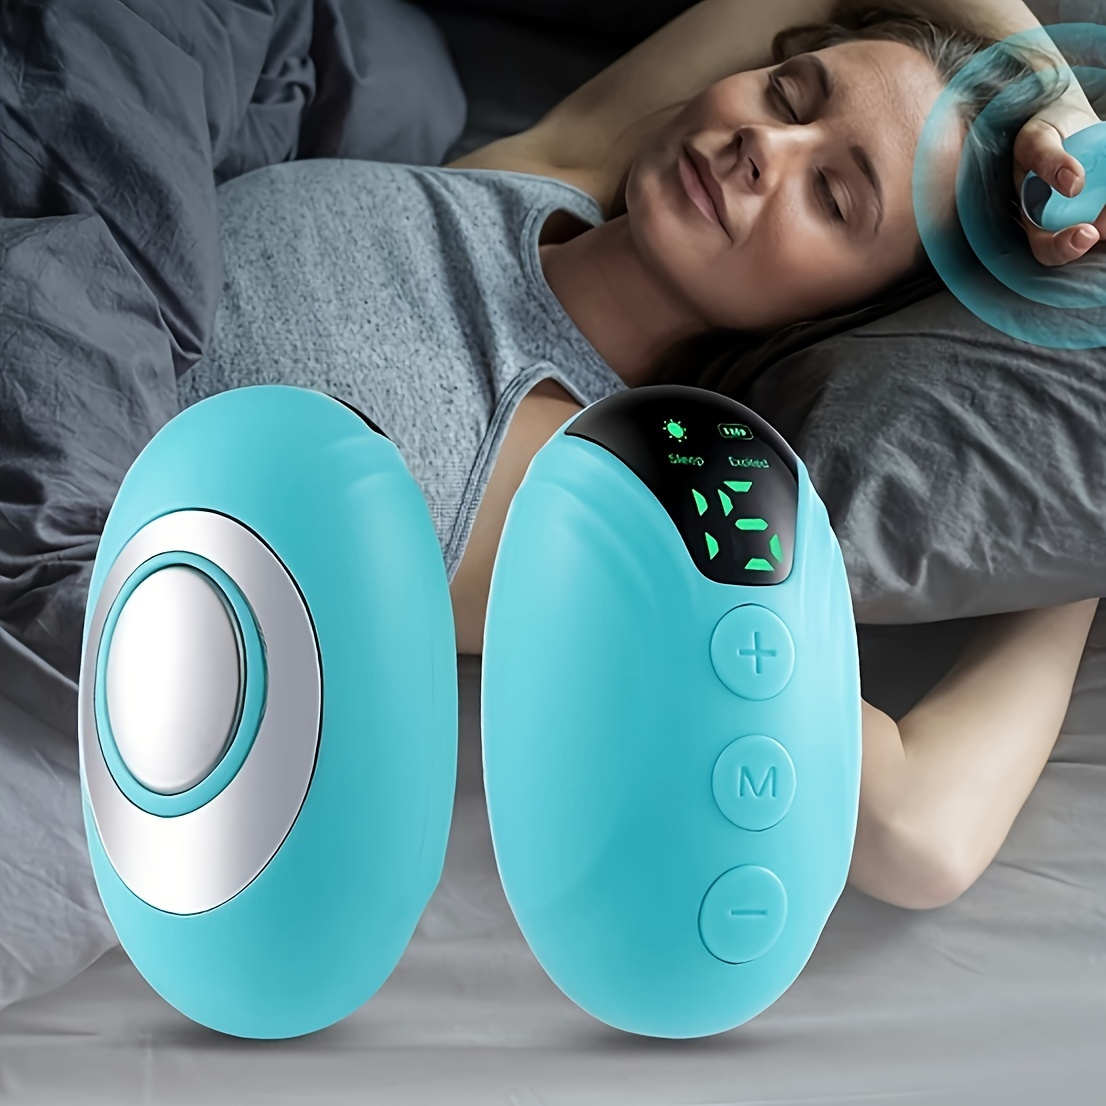 

Handheld Device, 15 Adjustable Gears, Usb Rechargeable, Portable Sleep Instrument, Gifts For Women Men Family